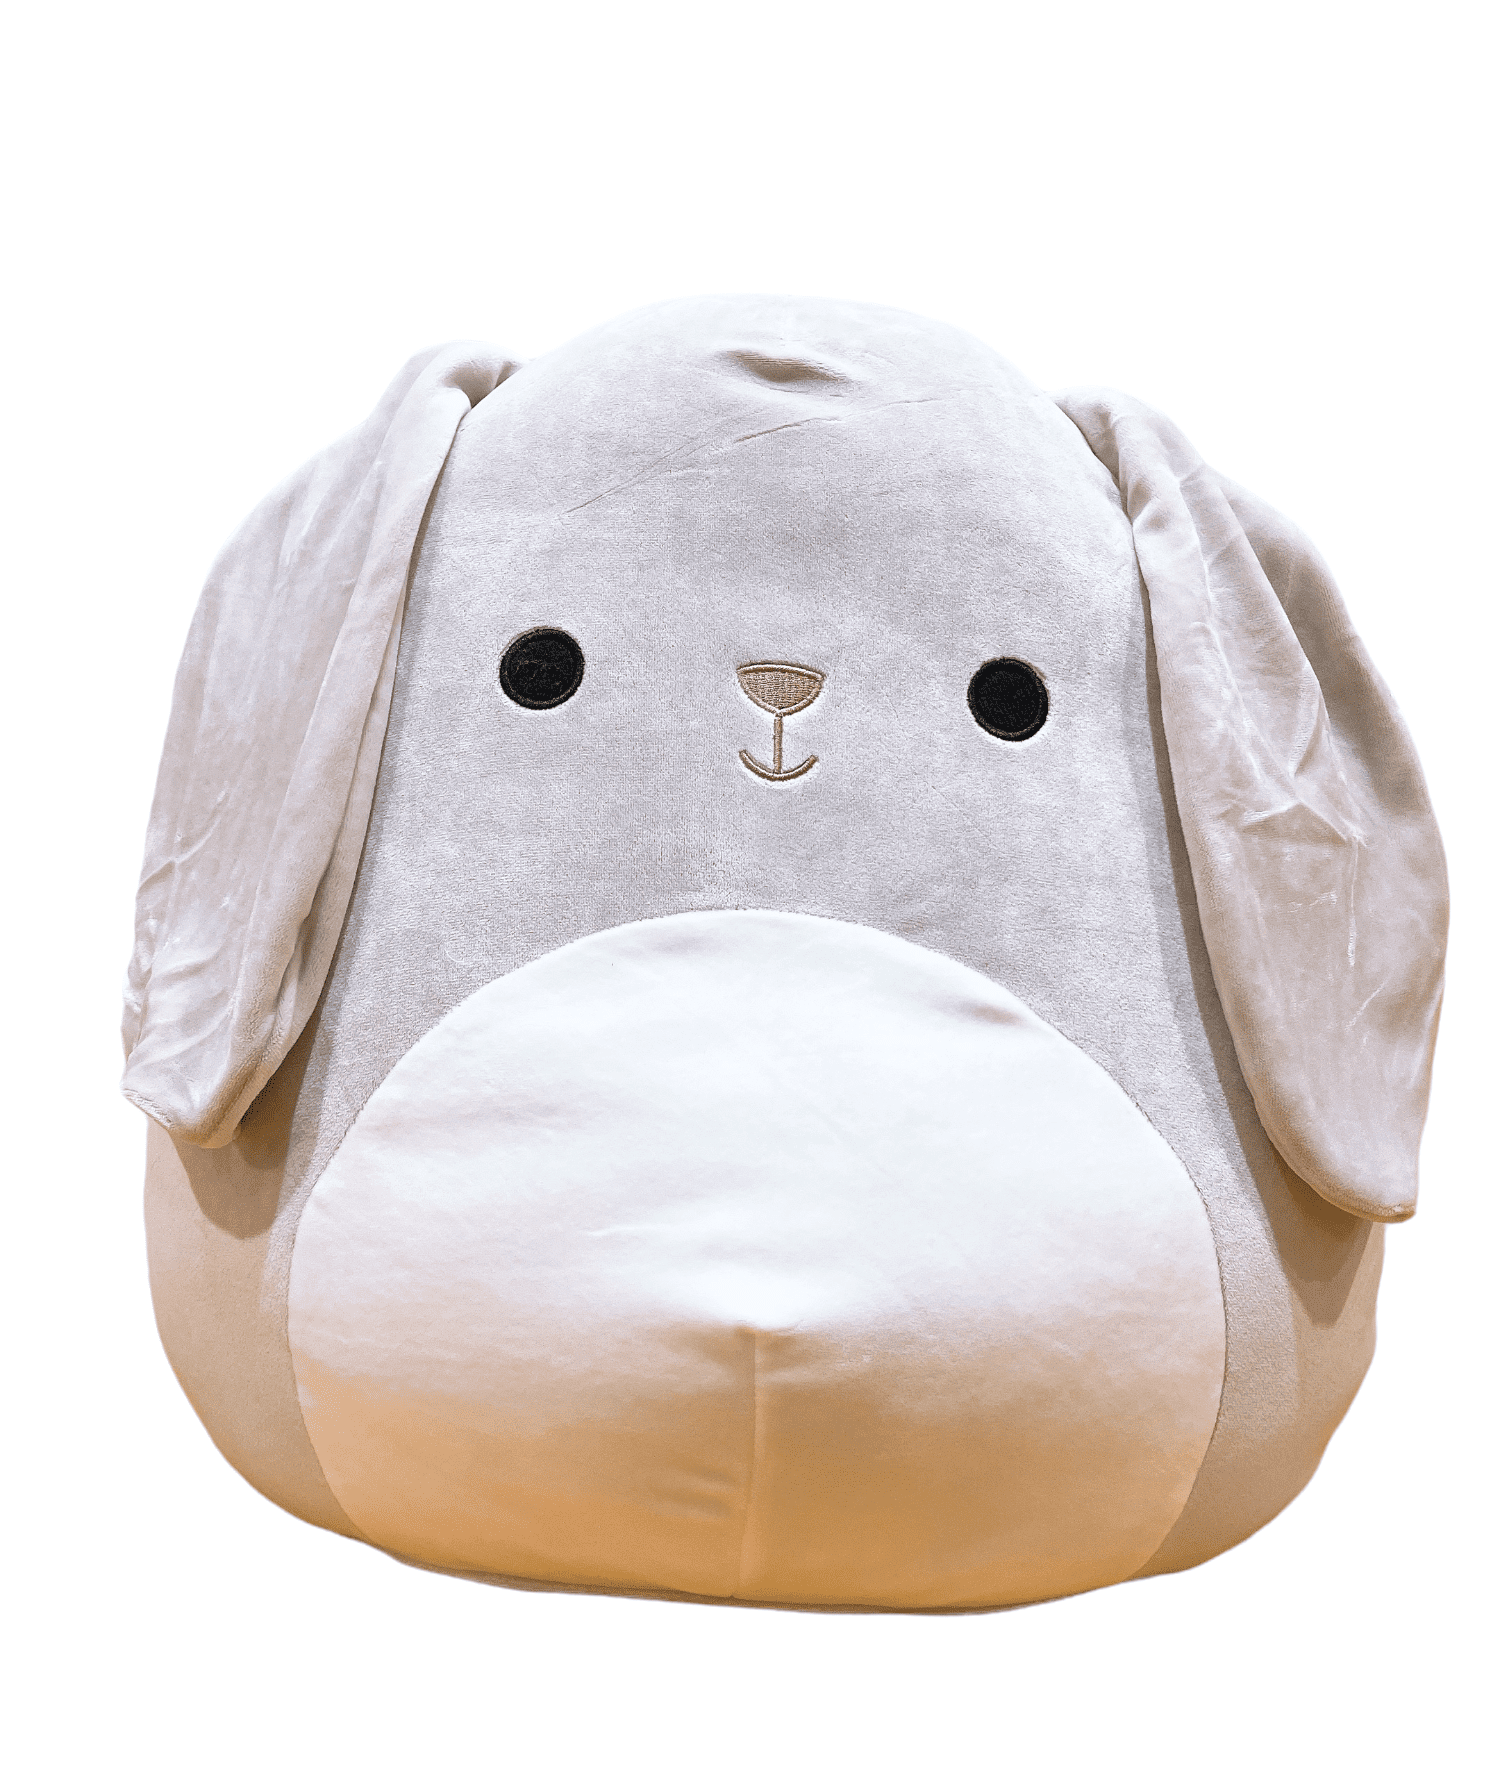 Squishmallows 16" Valentina the Bunny Soft Plush Kellytoy Easter Limited Edition 